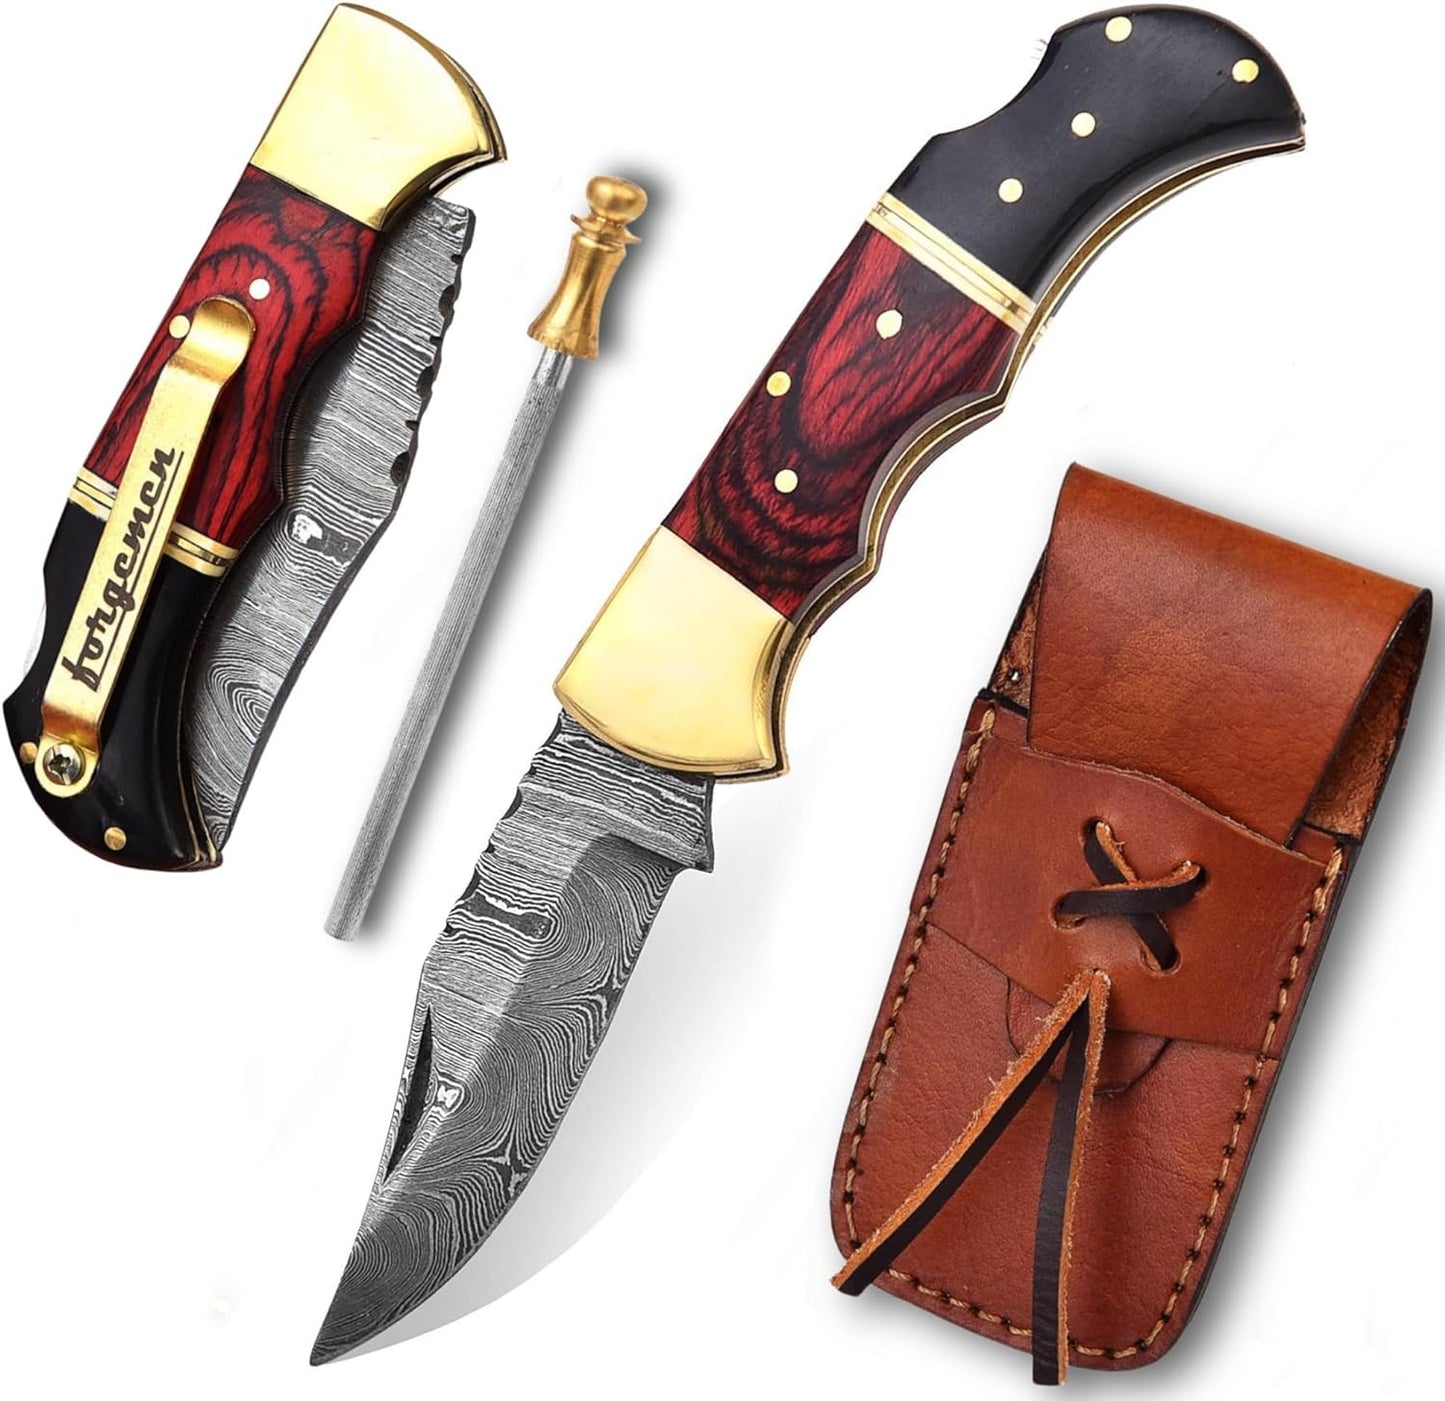 KD Pocket Folding knife with sheath for Indoor & Outdoors Activities